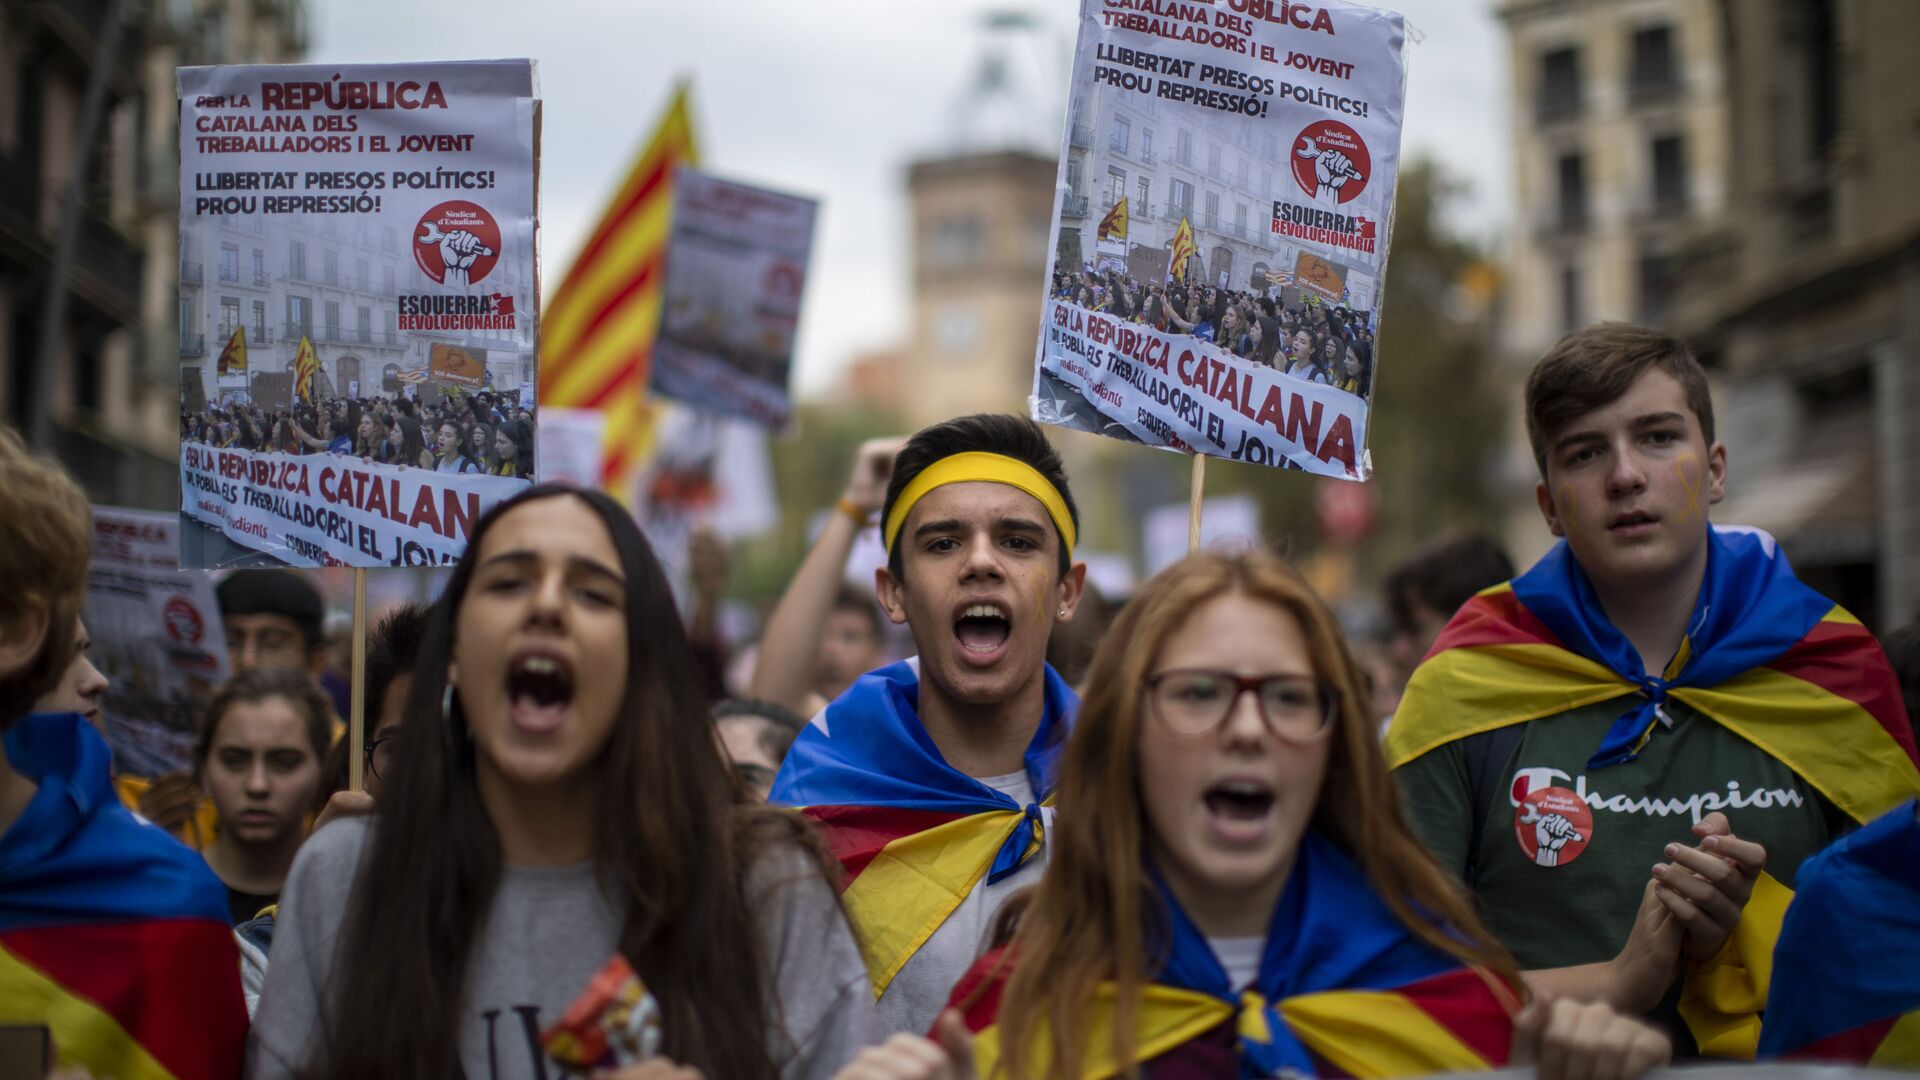 Students protest during a demonstration in Barcelona, Spain, Thursday, Oct. 31, 2019. Hundreds of young people decided to set up camp after Spain's Supreme Court convicted 12 separatist leaders of illegally promoting Catalonia region's independence and sentenced nine of them to prison. - Sputnik International, 1920, 16.12.2021